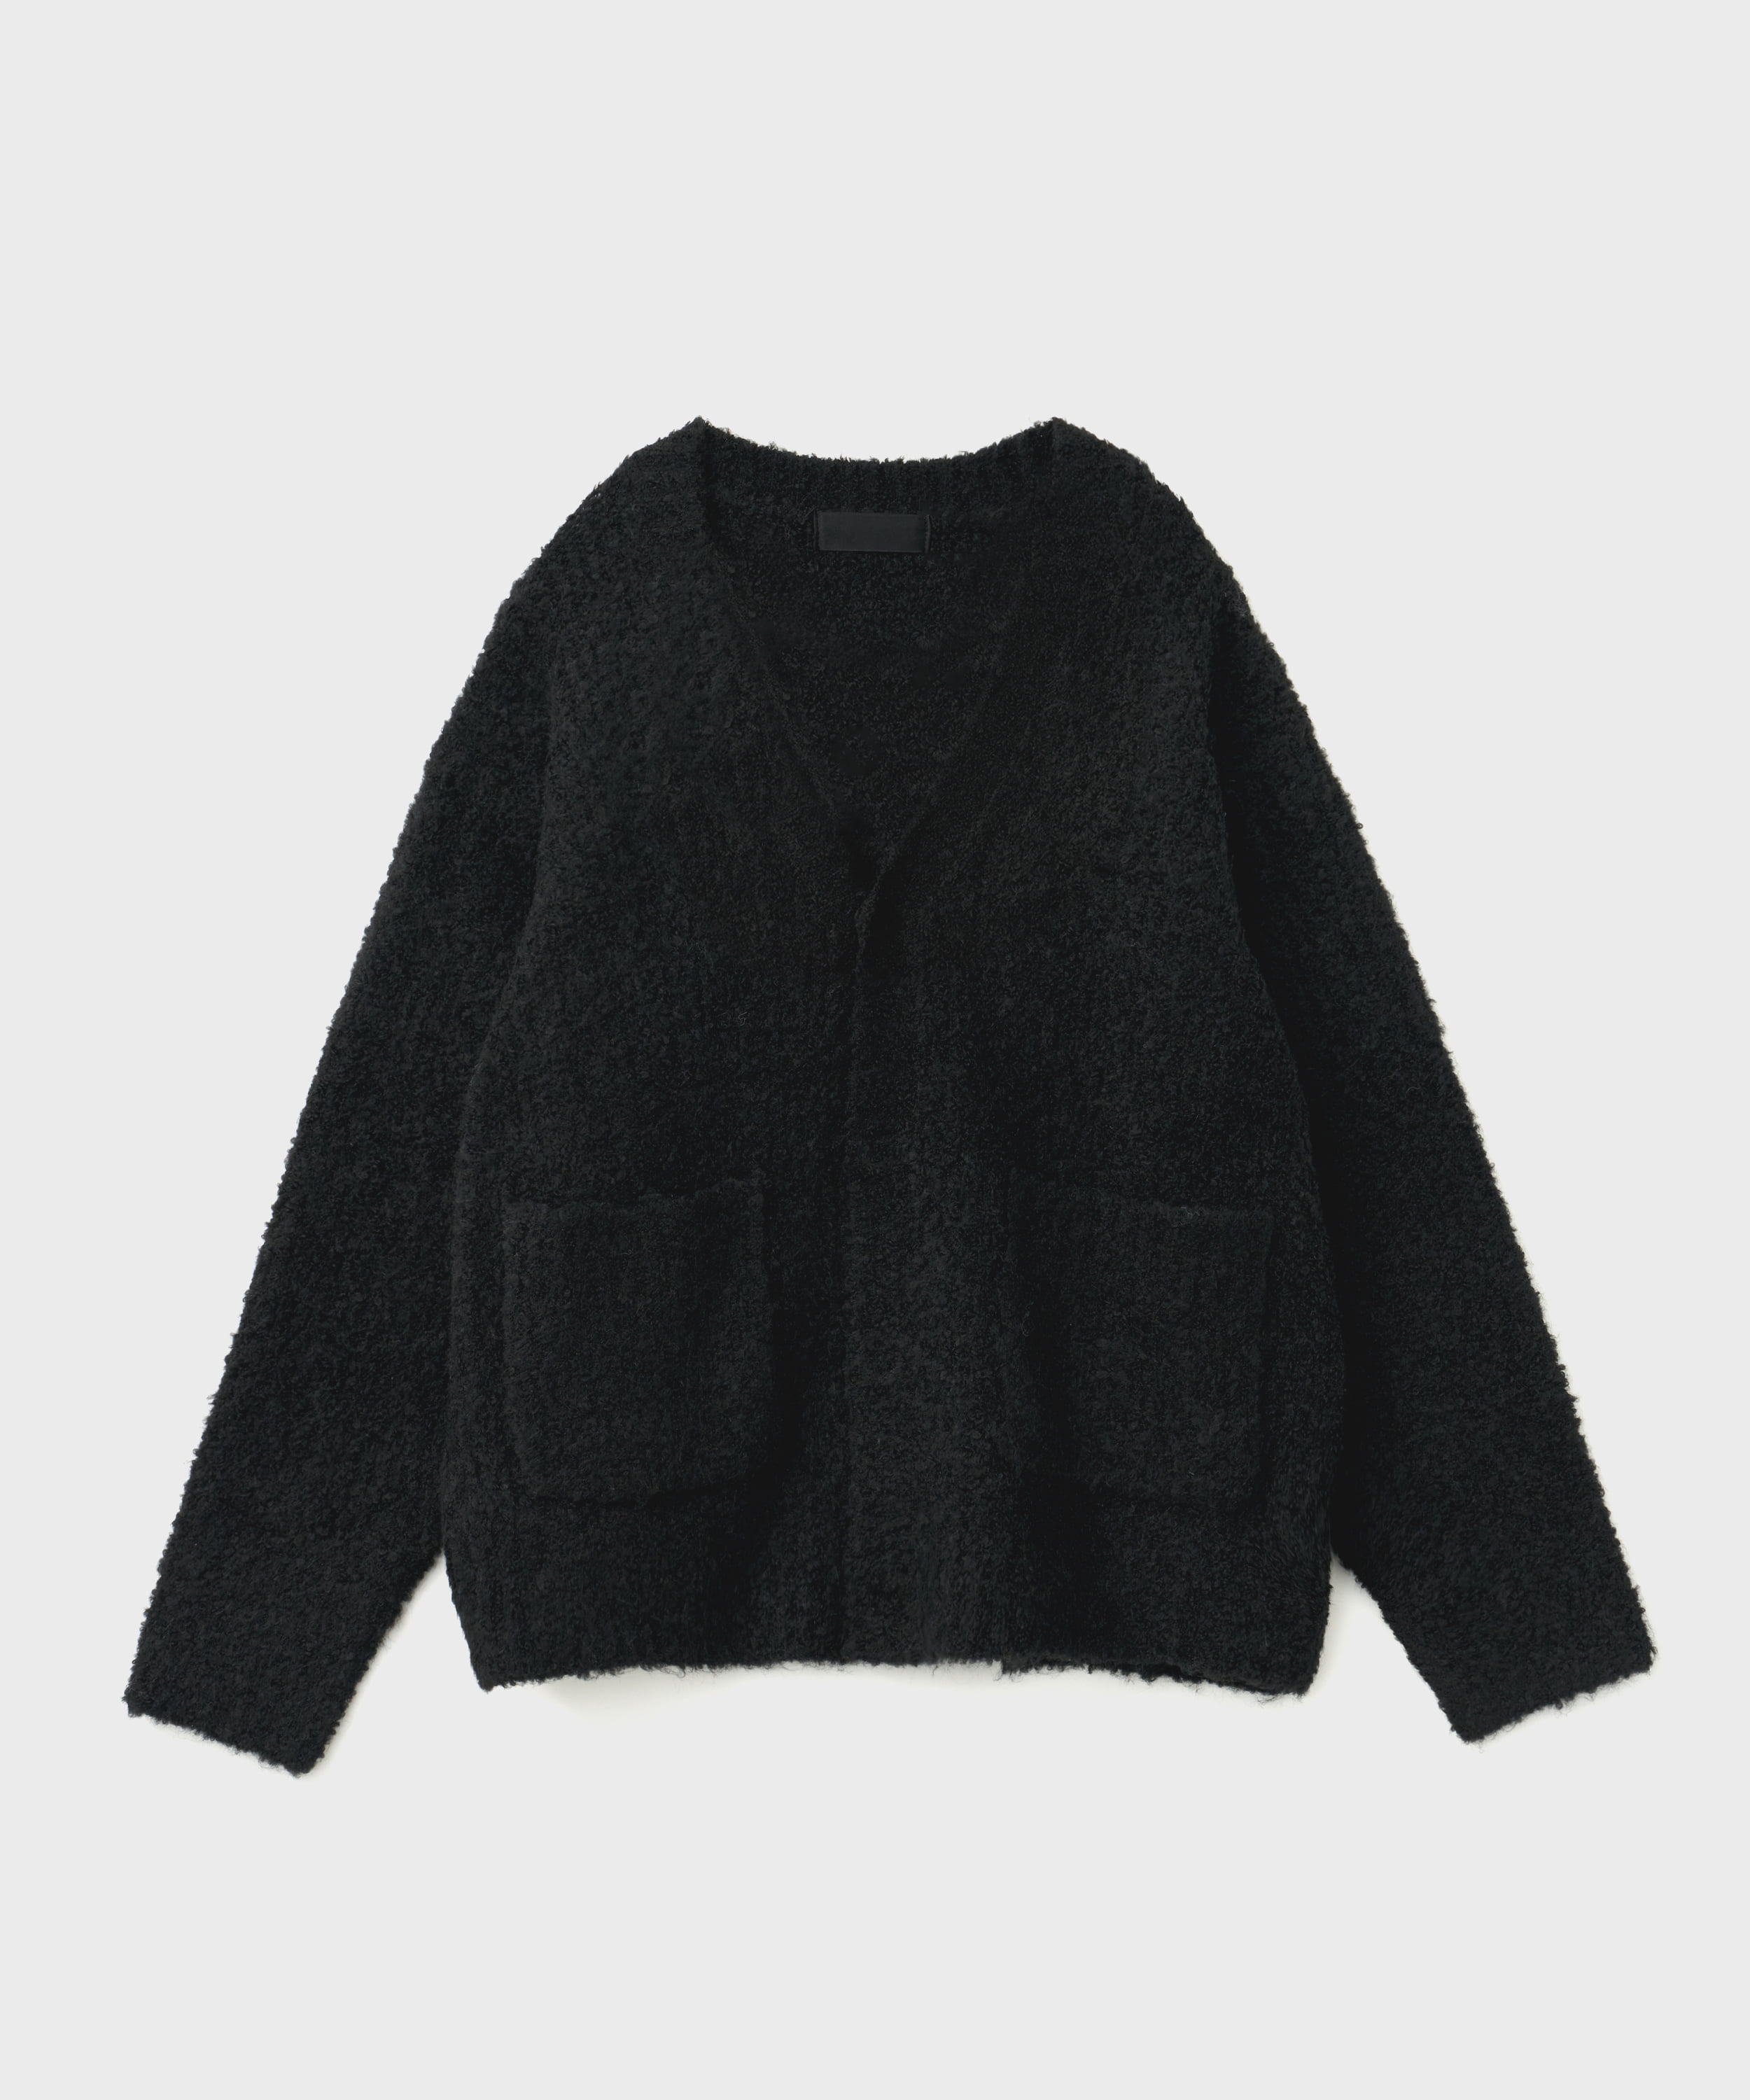 Inflated Cardigan (Black)